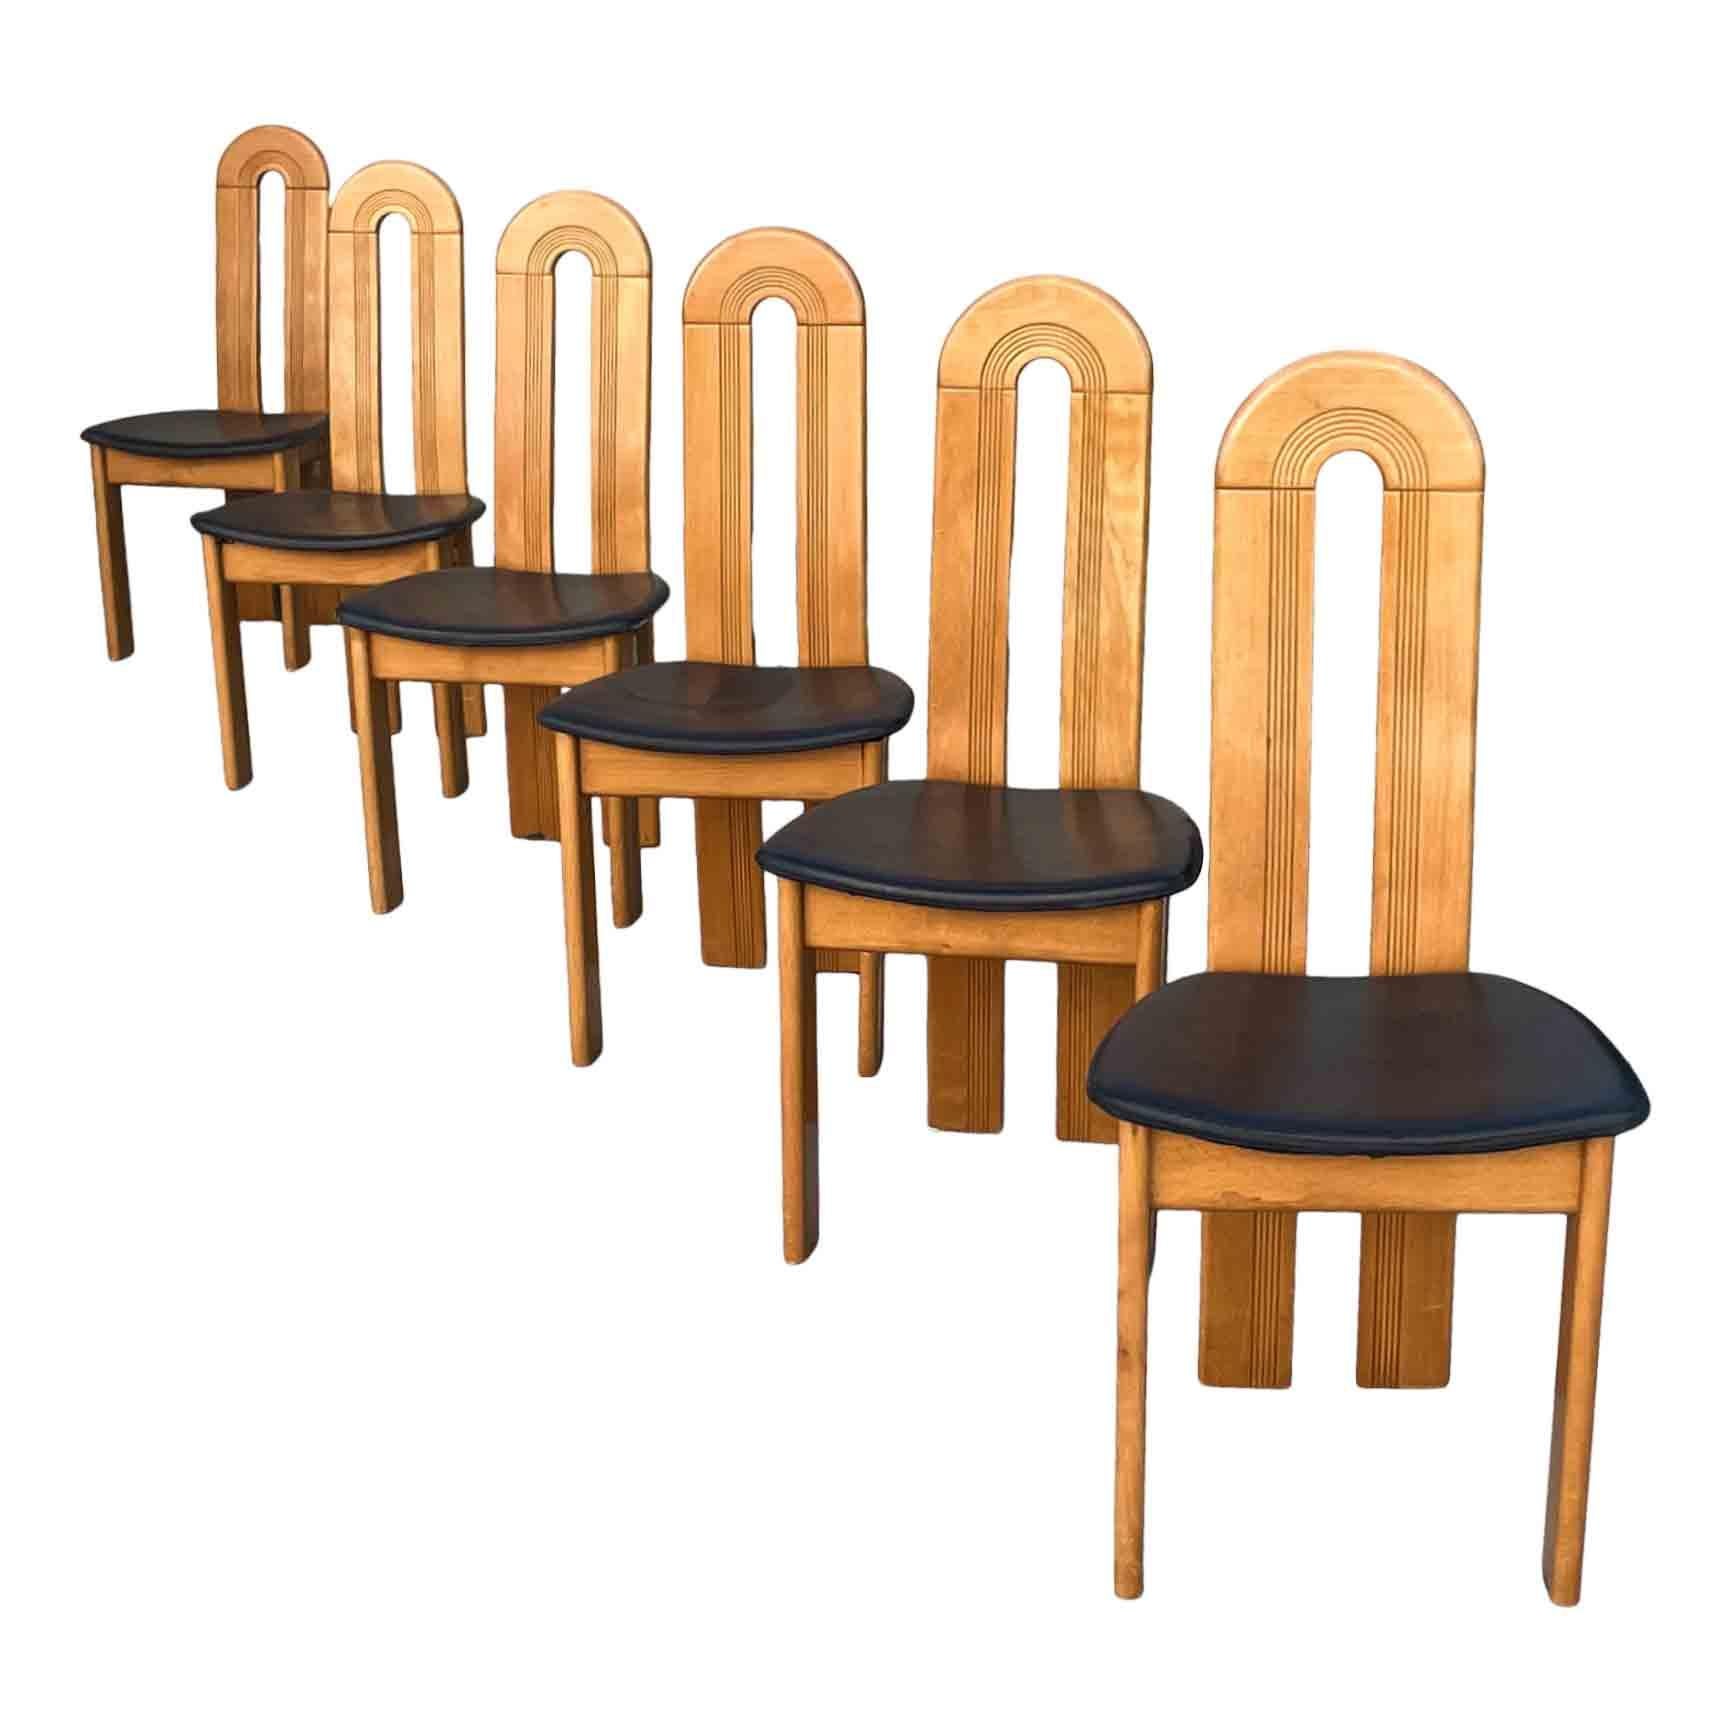 Set of six Italian dining chairs, made in the late 80s.

They feature an ash wood structure and a black leather seat.

They remind the shapes Afra and Tobia Scarpa proposed before with “Africa” and Mario Marenco with “Sapporo” chairs.

Excellent